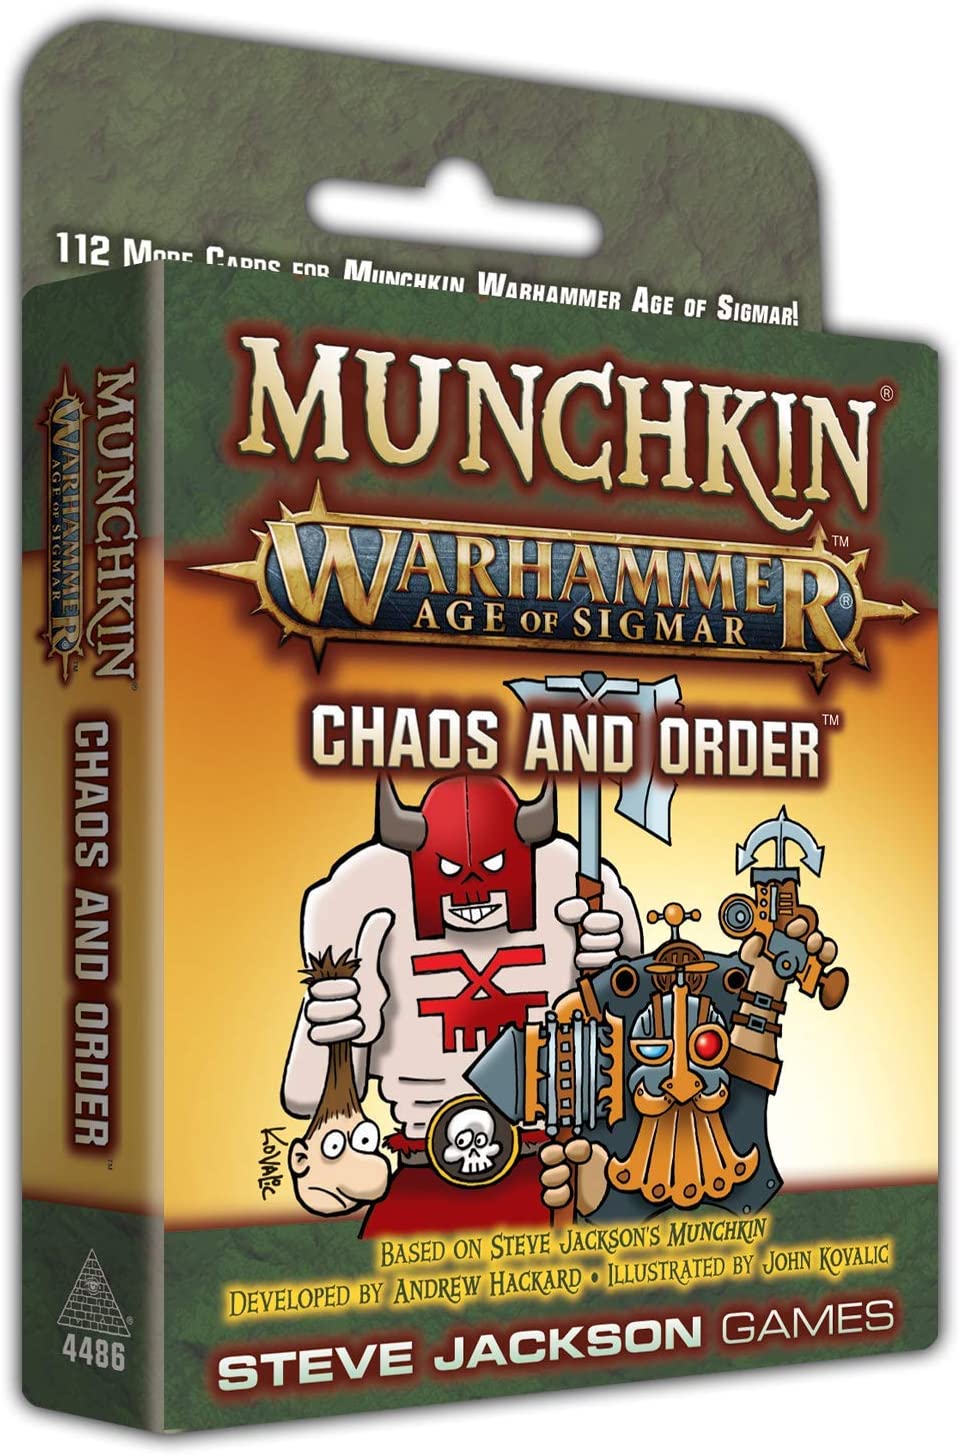 (BSG Certified USED) Munchkin Warhammer: Age of Sigmar - Chaos and Order